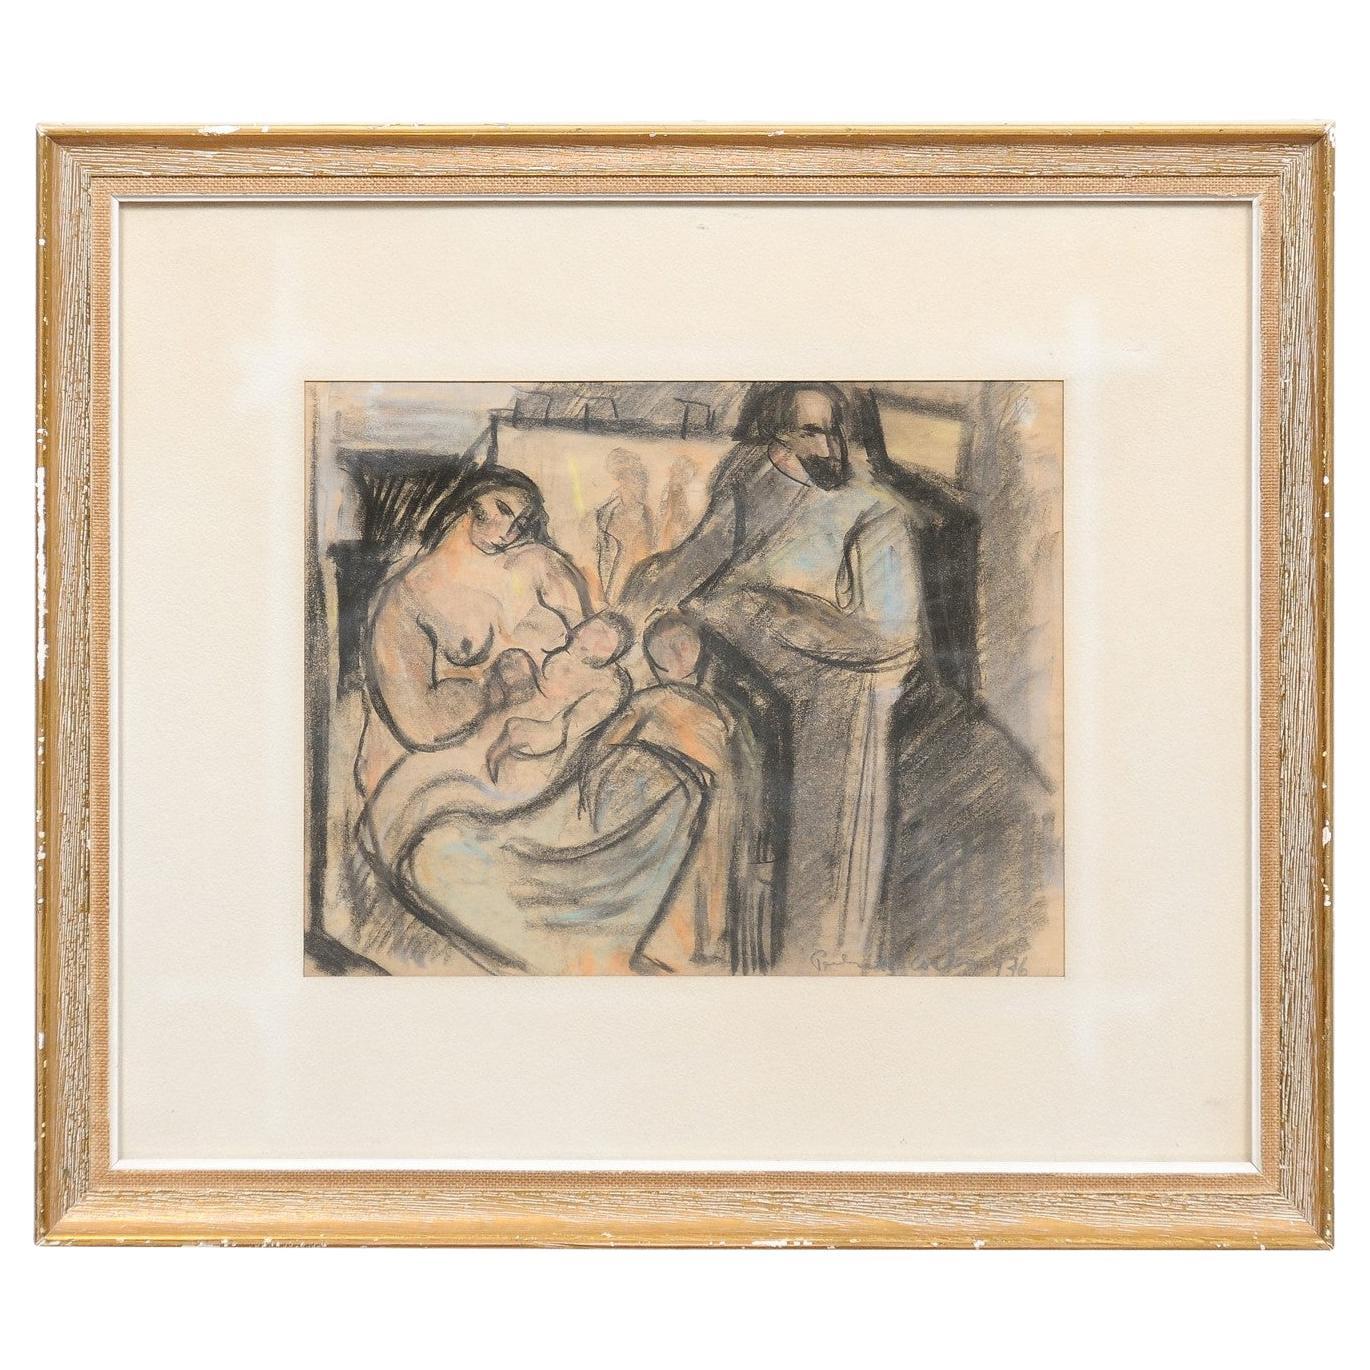 Framed Charcoal Drawing, Signed and Dated 1938